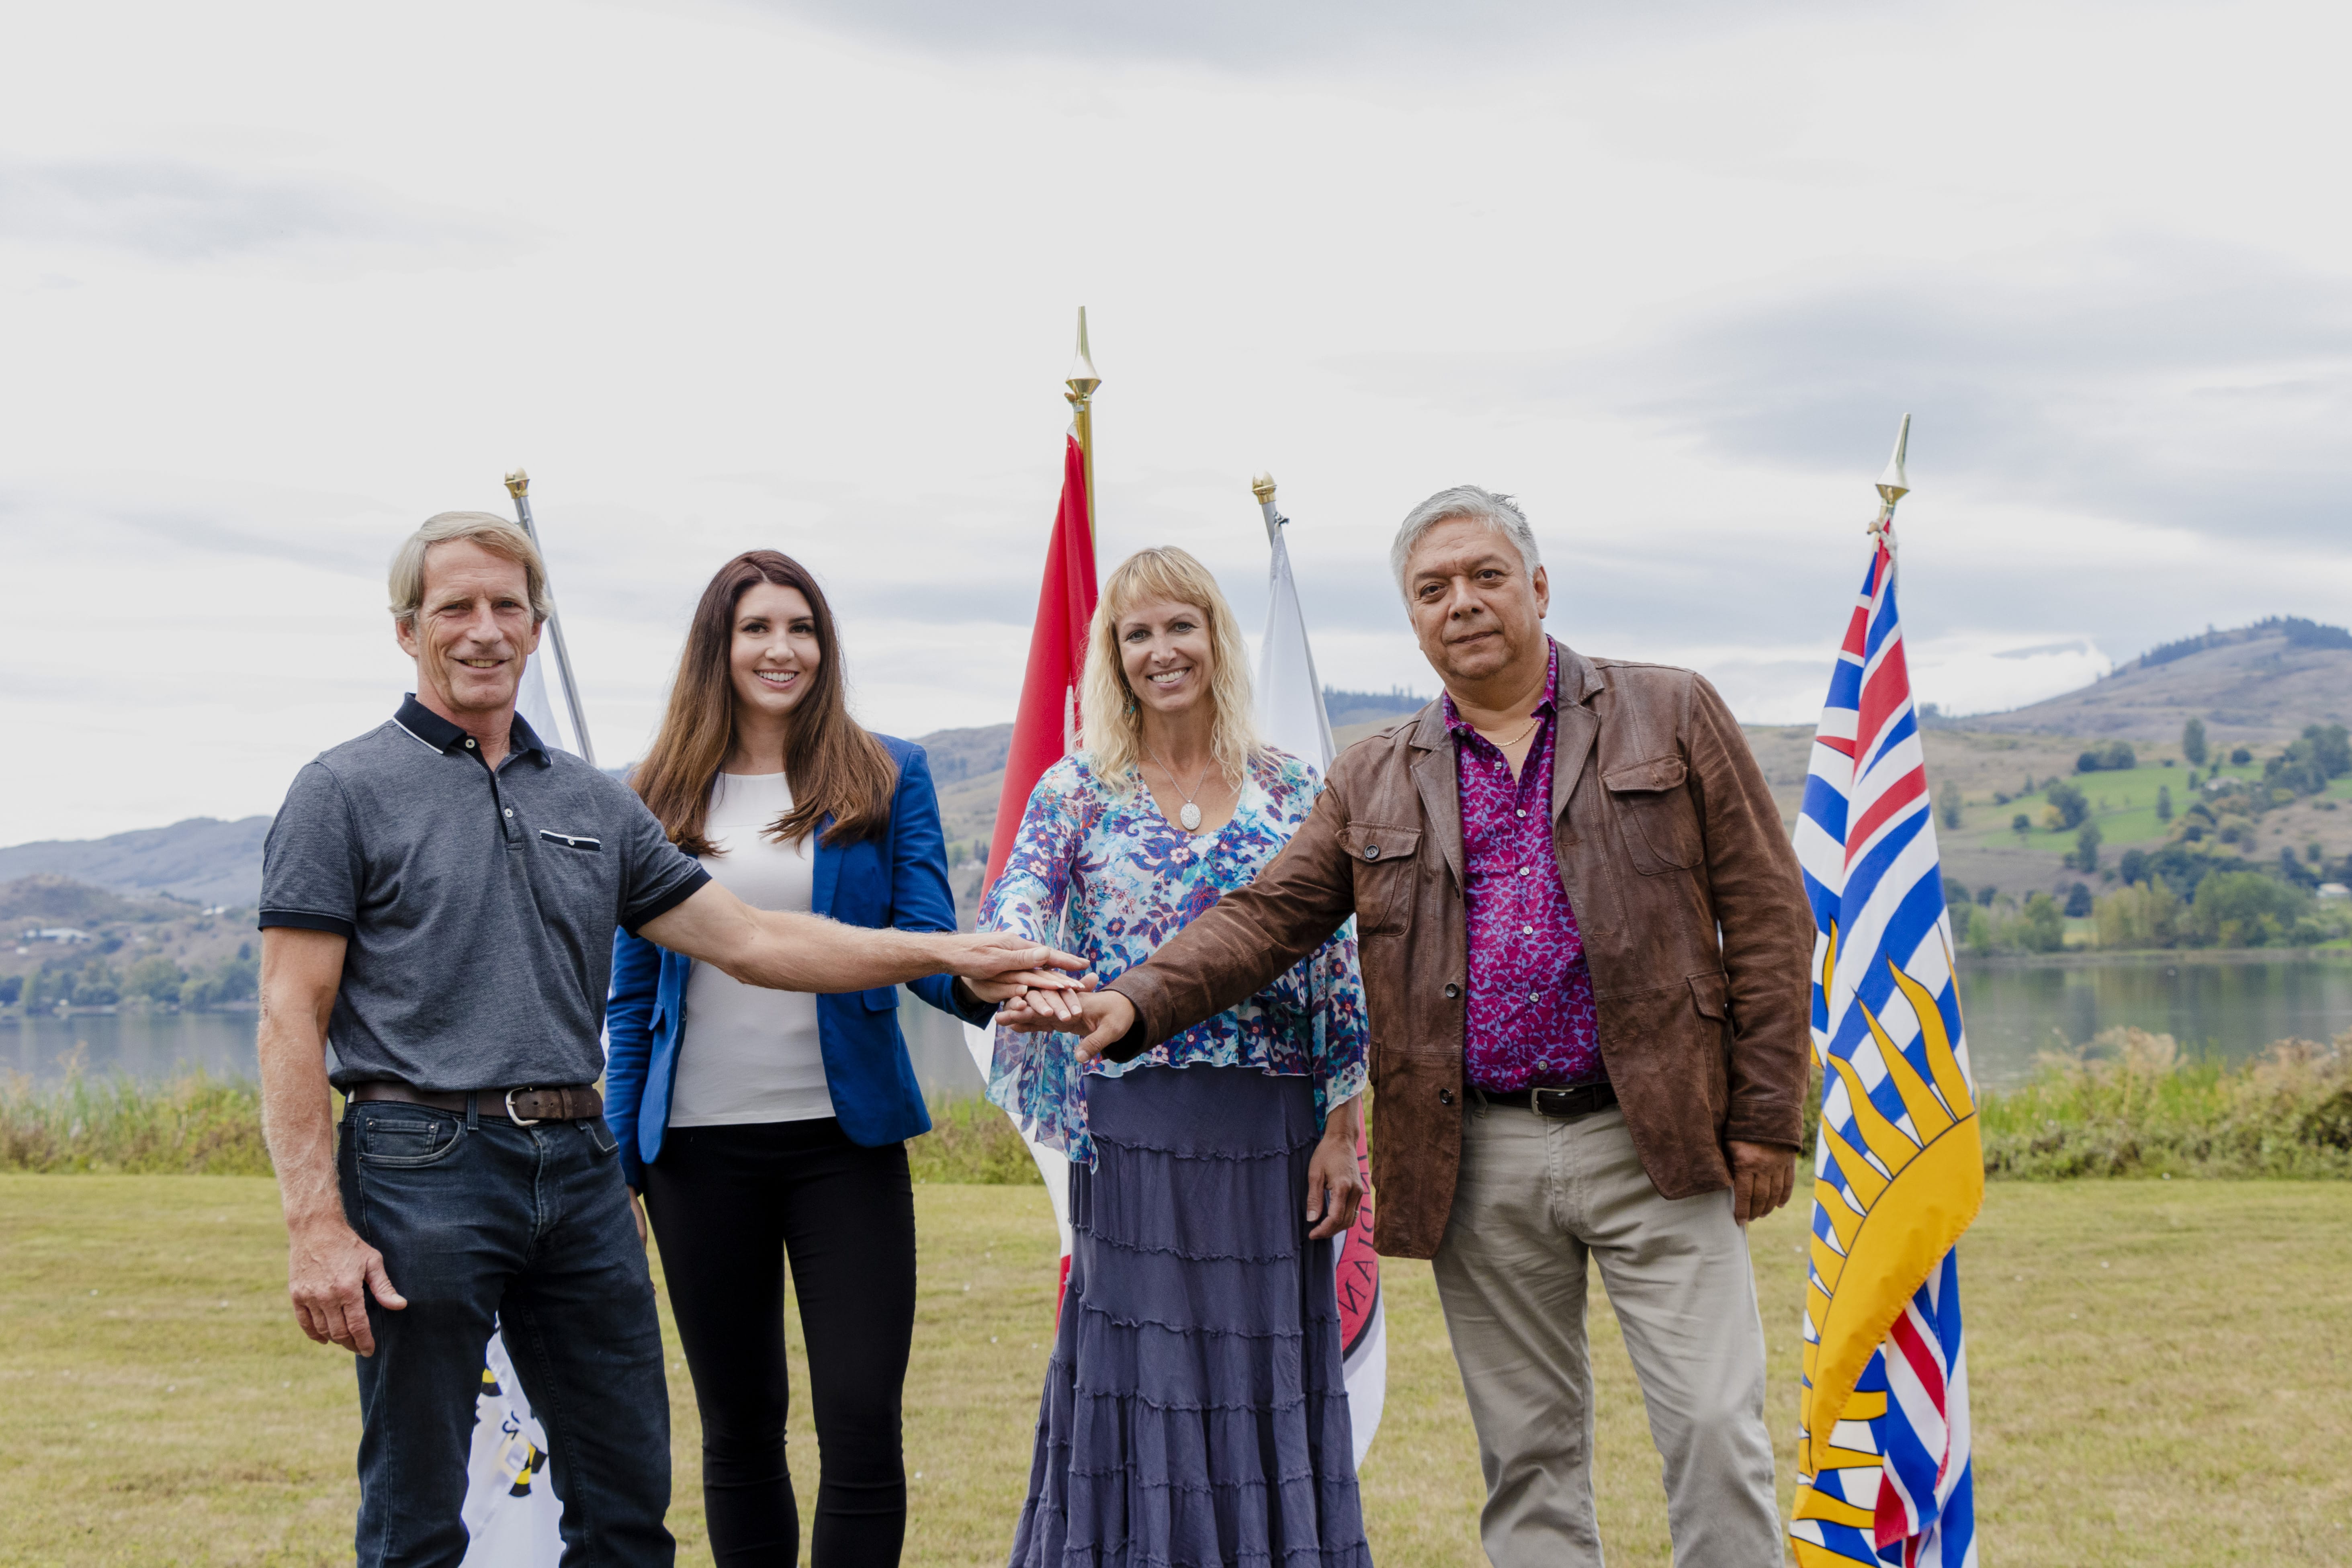 Image of 4 people shaking hands with flags and mountains in the background